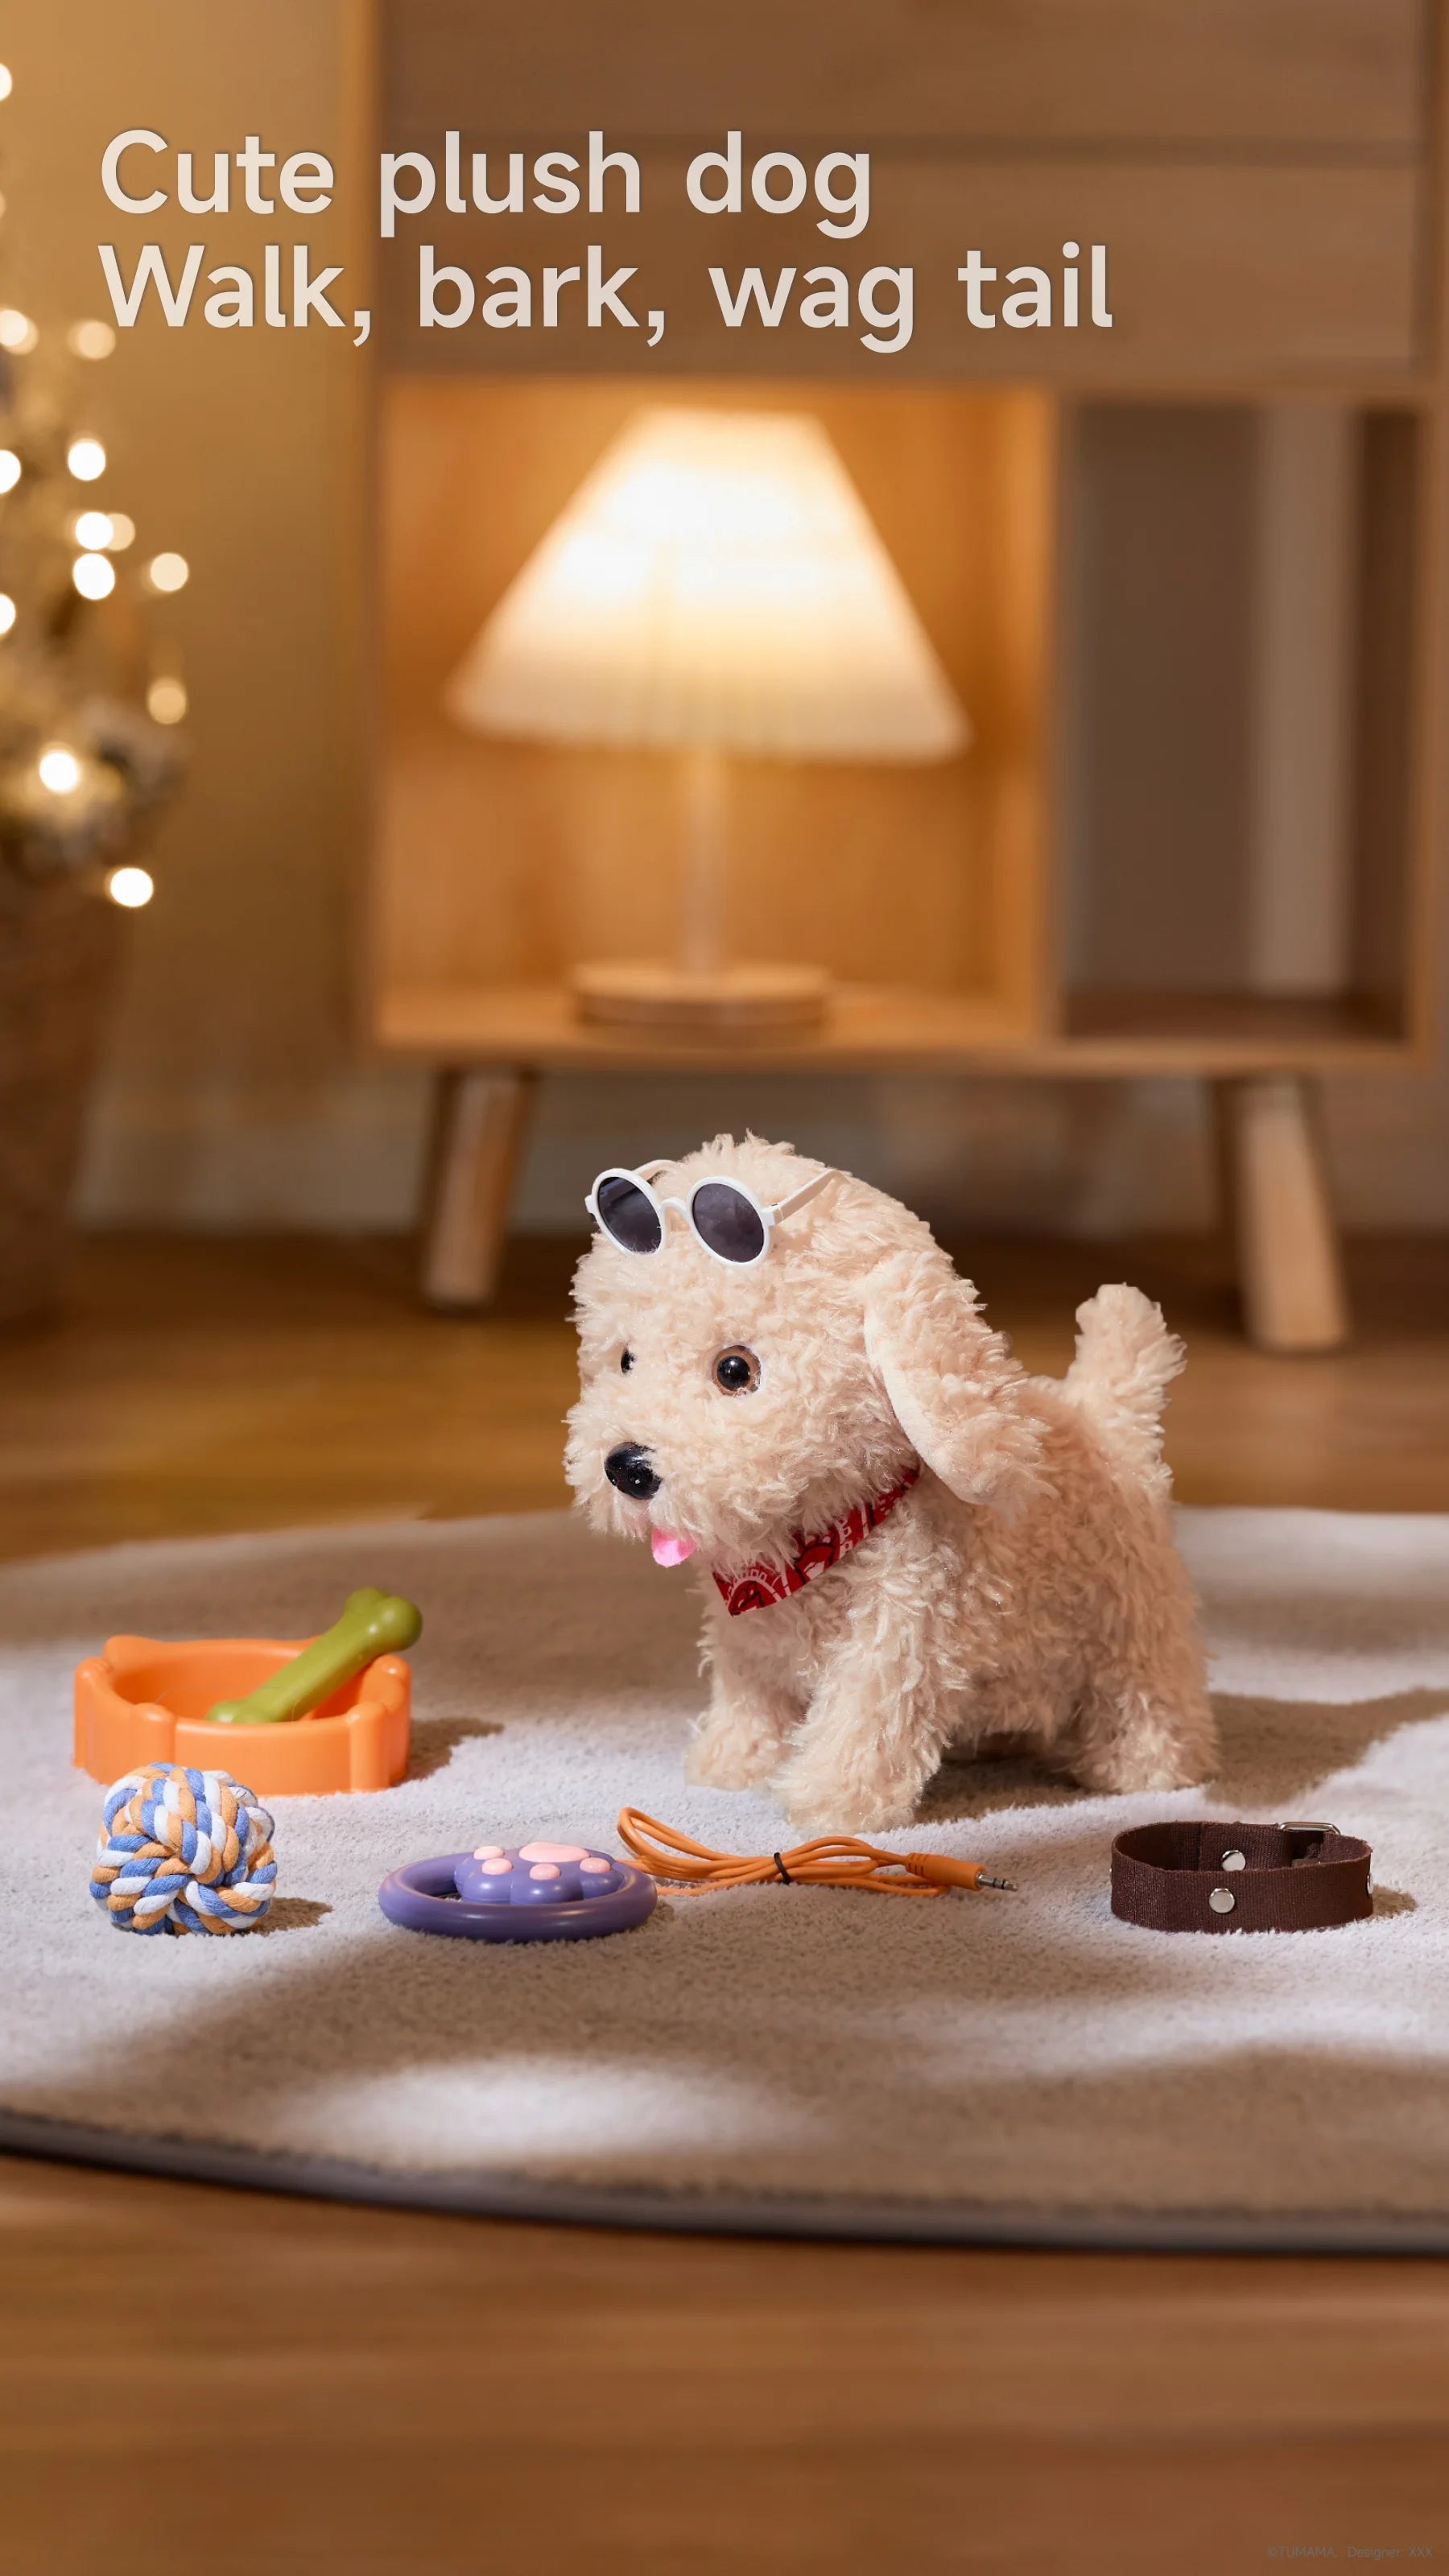 Leash equipped walking puppy toys for imaginative play